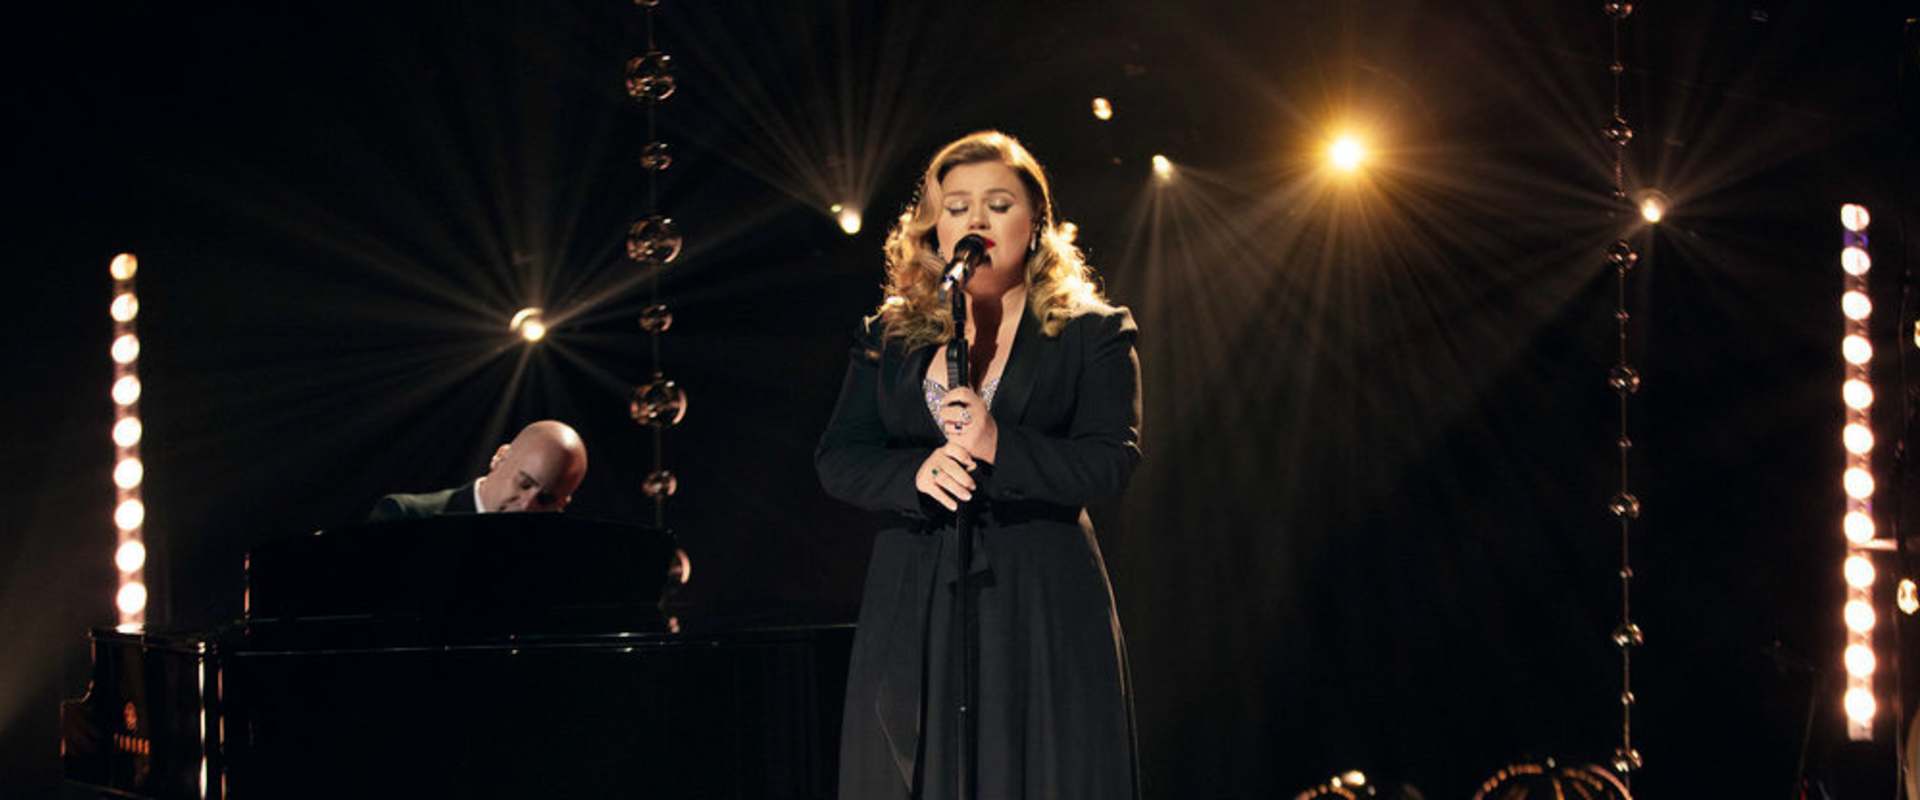 Kelly Clarkson Presents: When Christmas Comes Around background 1